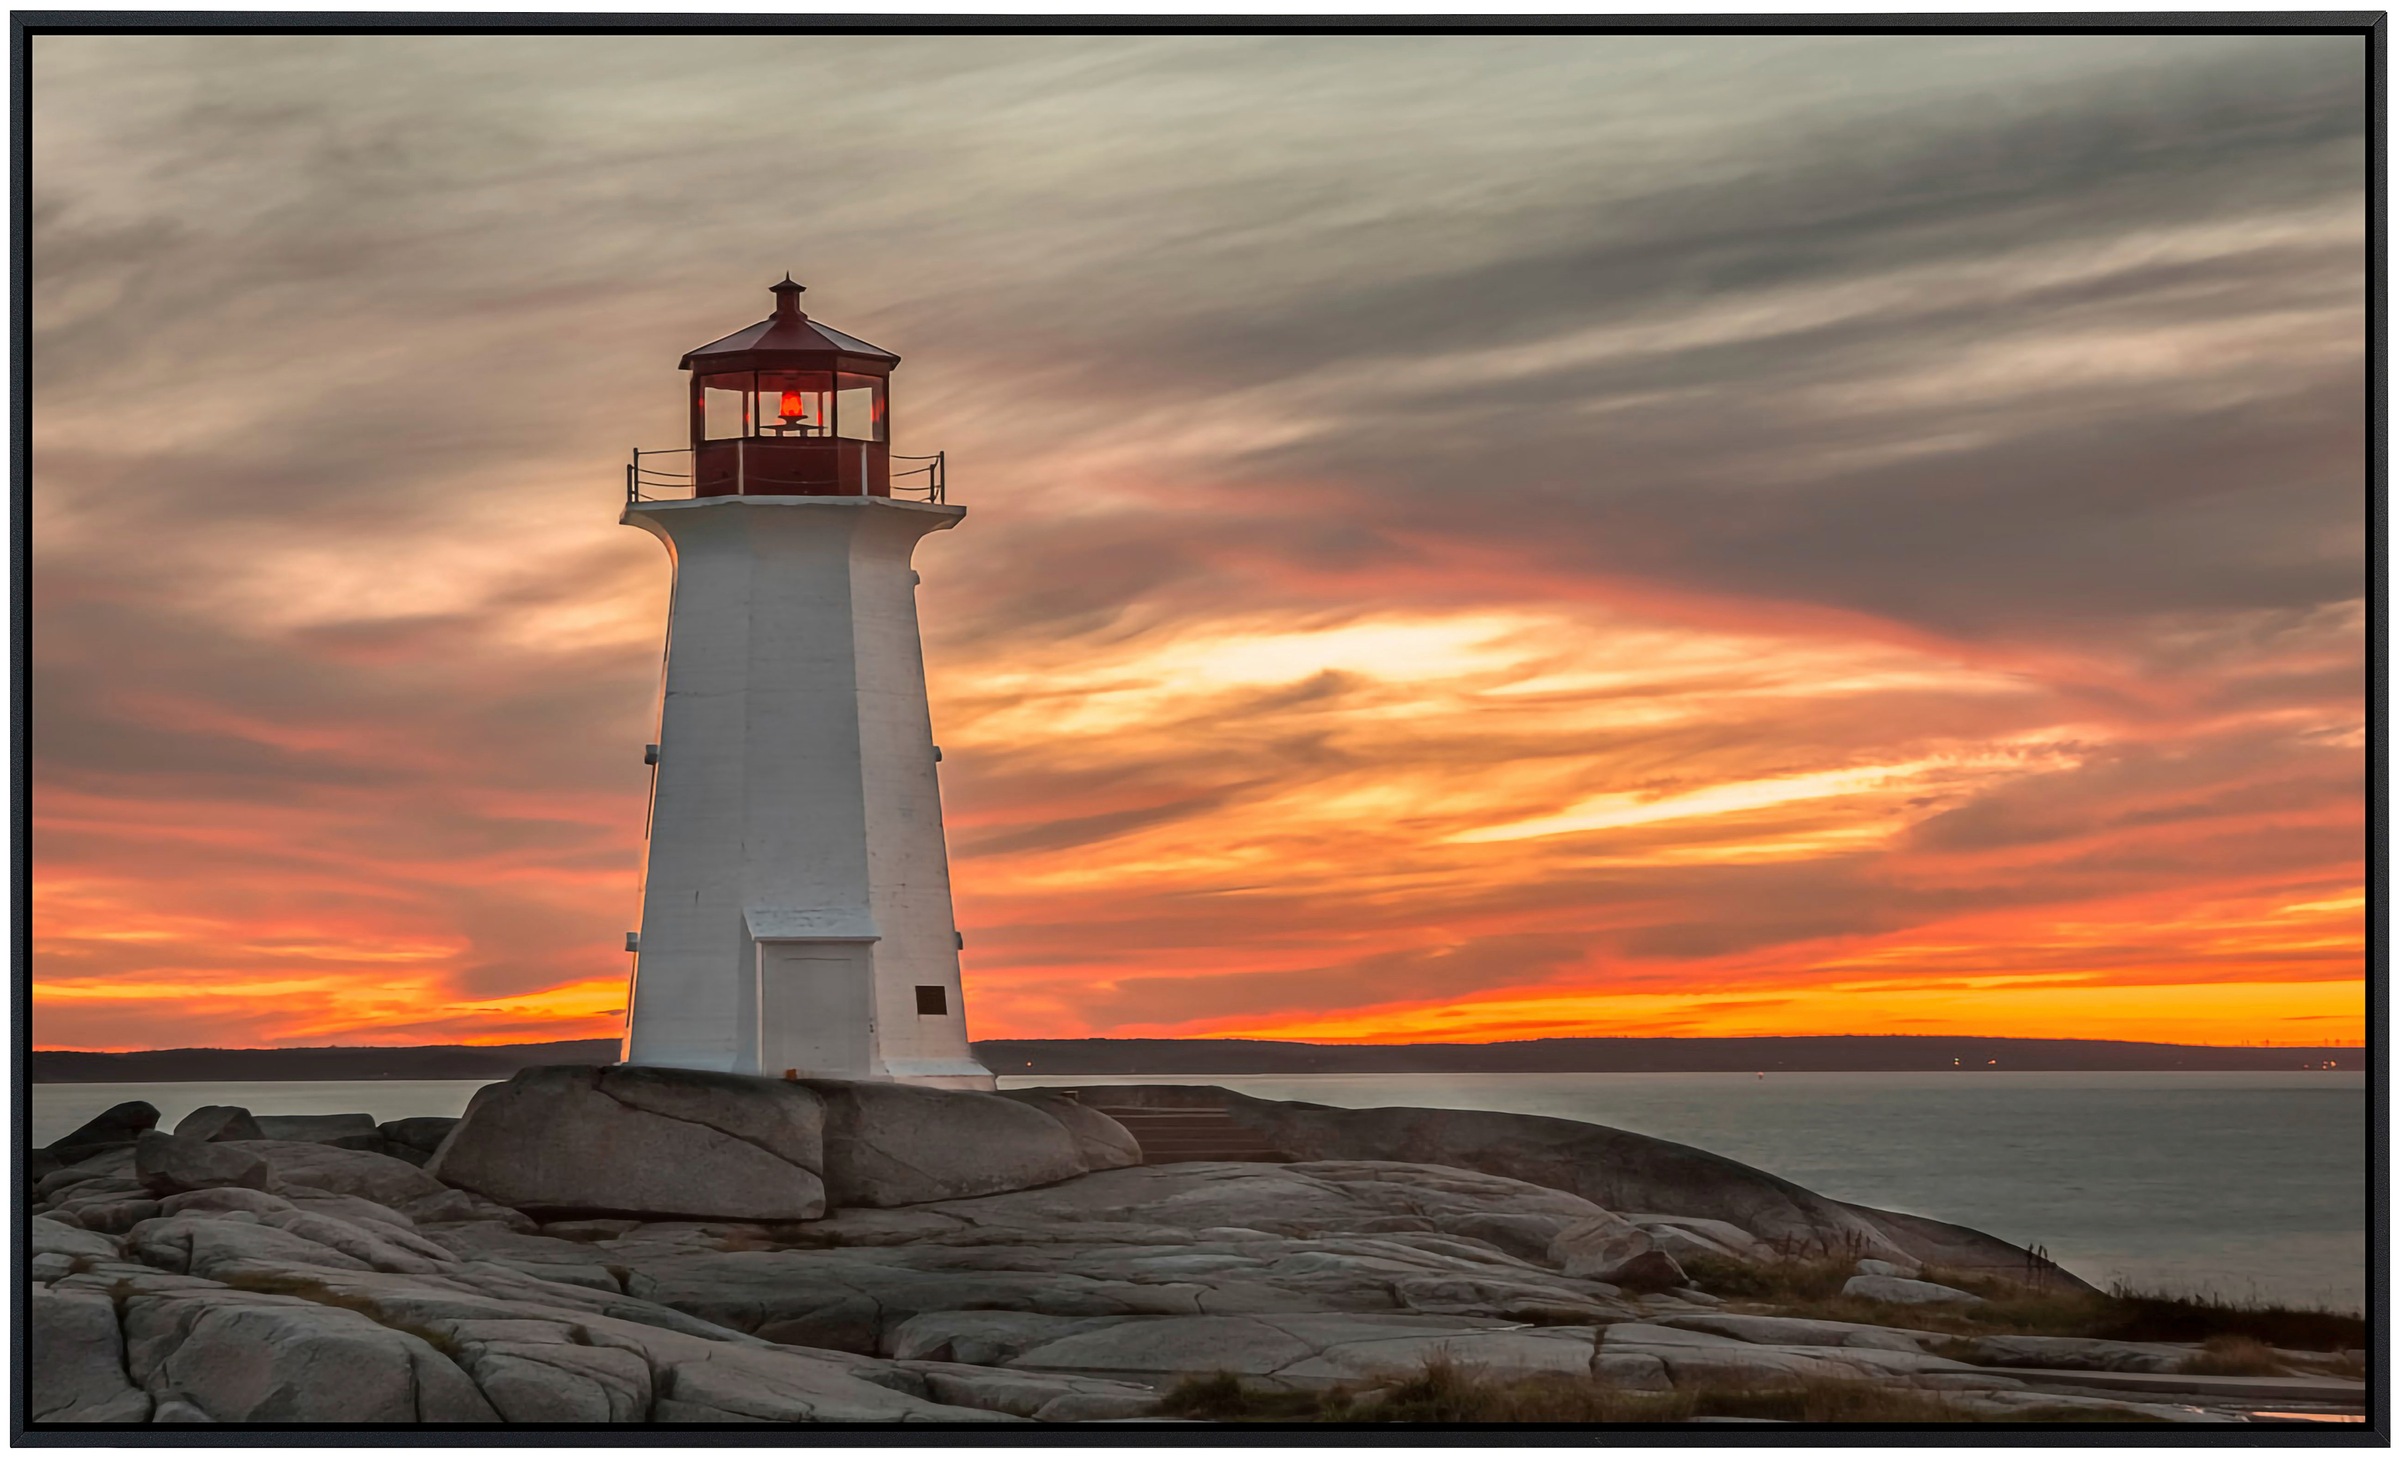 Papermoon Infrarotheizung »Leuchtturm Peggy Cove Sonnenuntergang«, sehr angenehme Strahlungswärme